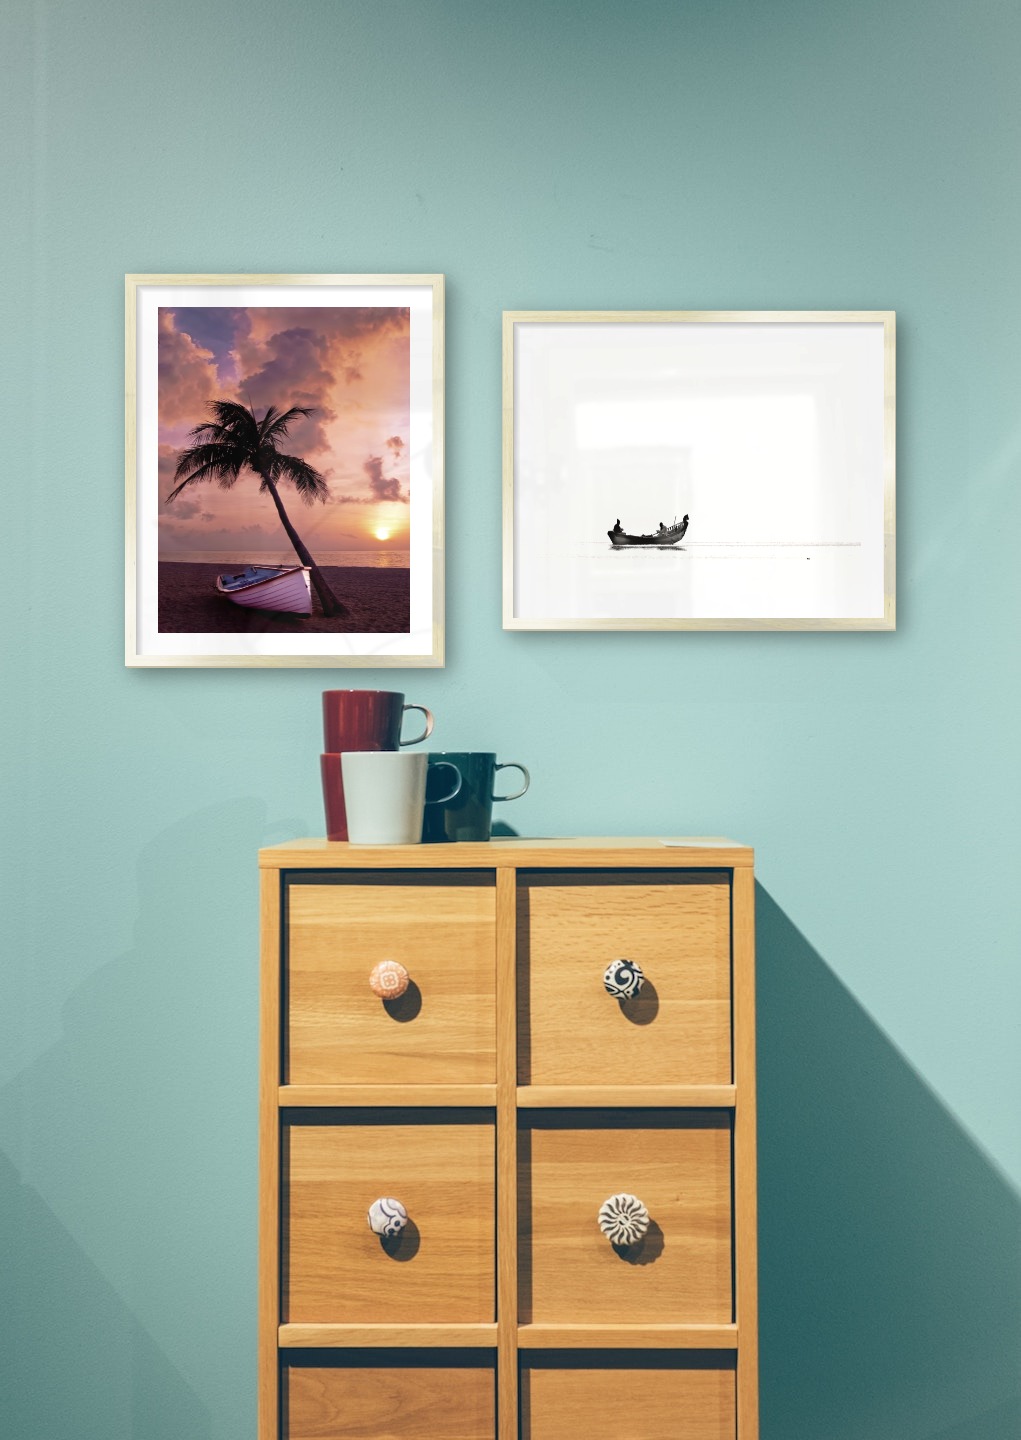 Gallery wall with picture frames in gold in sizes 40x50 with prints "Palm on the beach" and "People in boat"